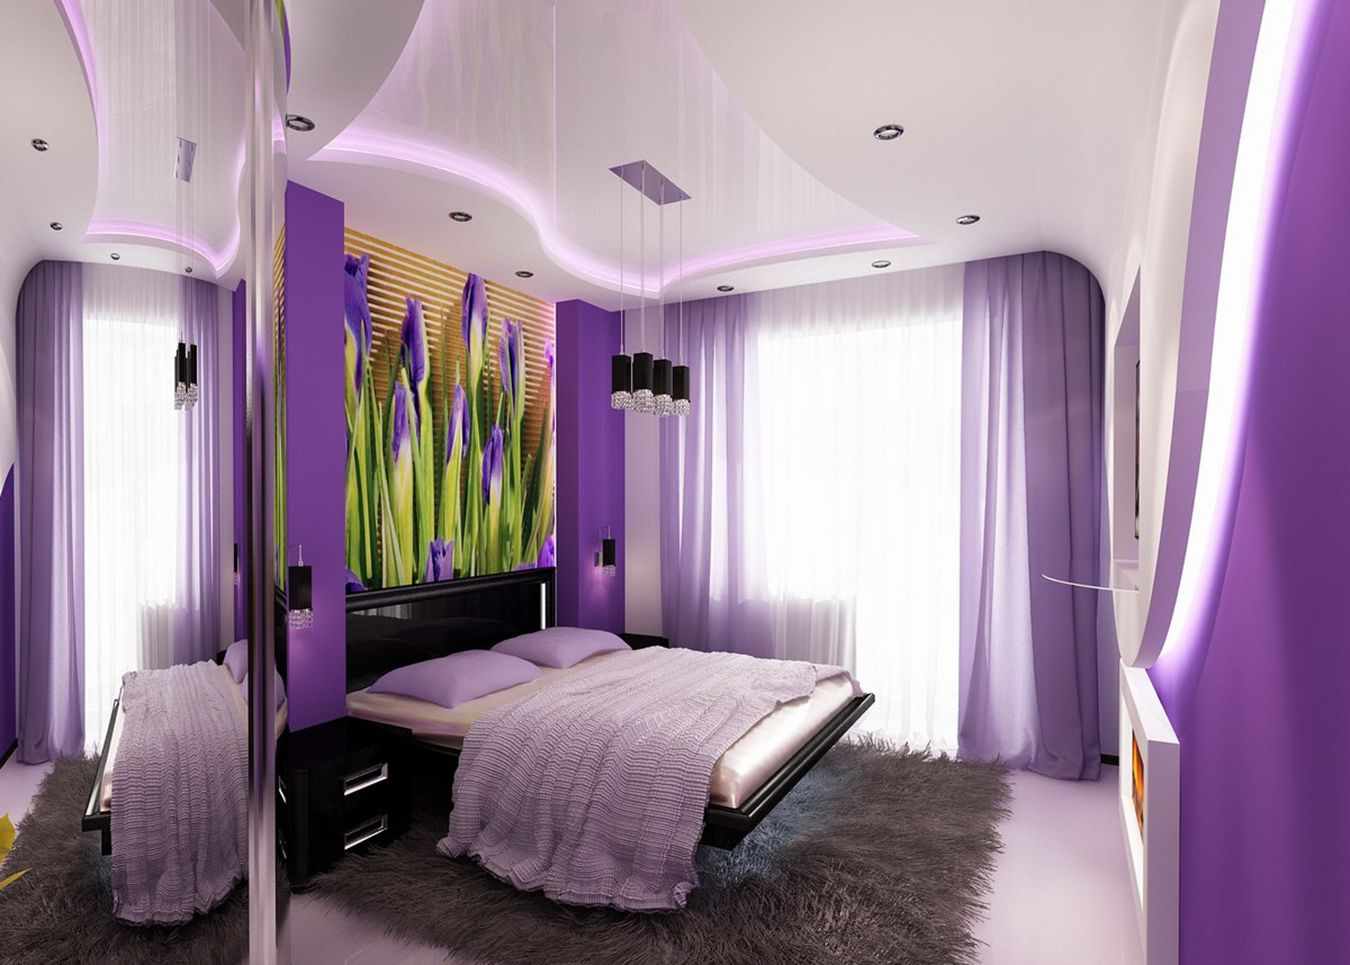 An example of a bright bedroom style